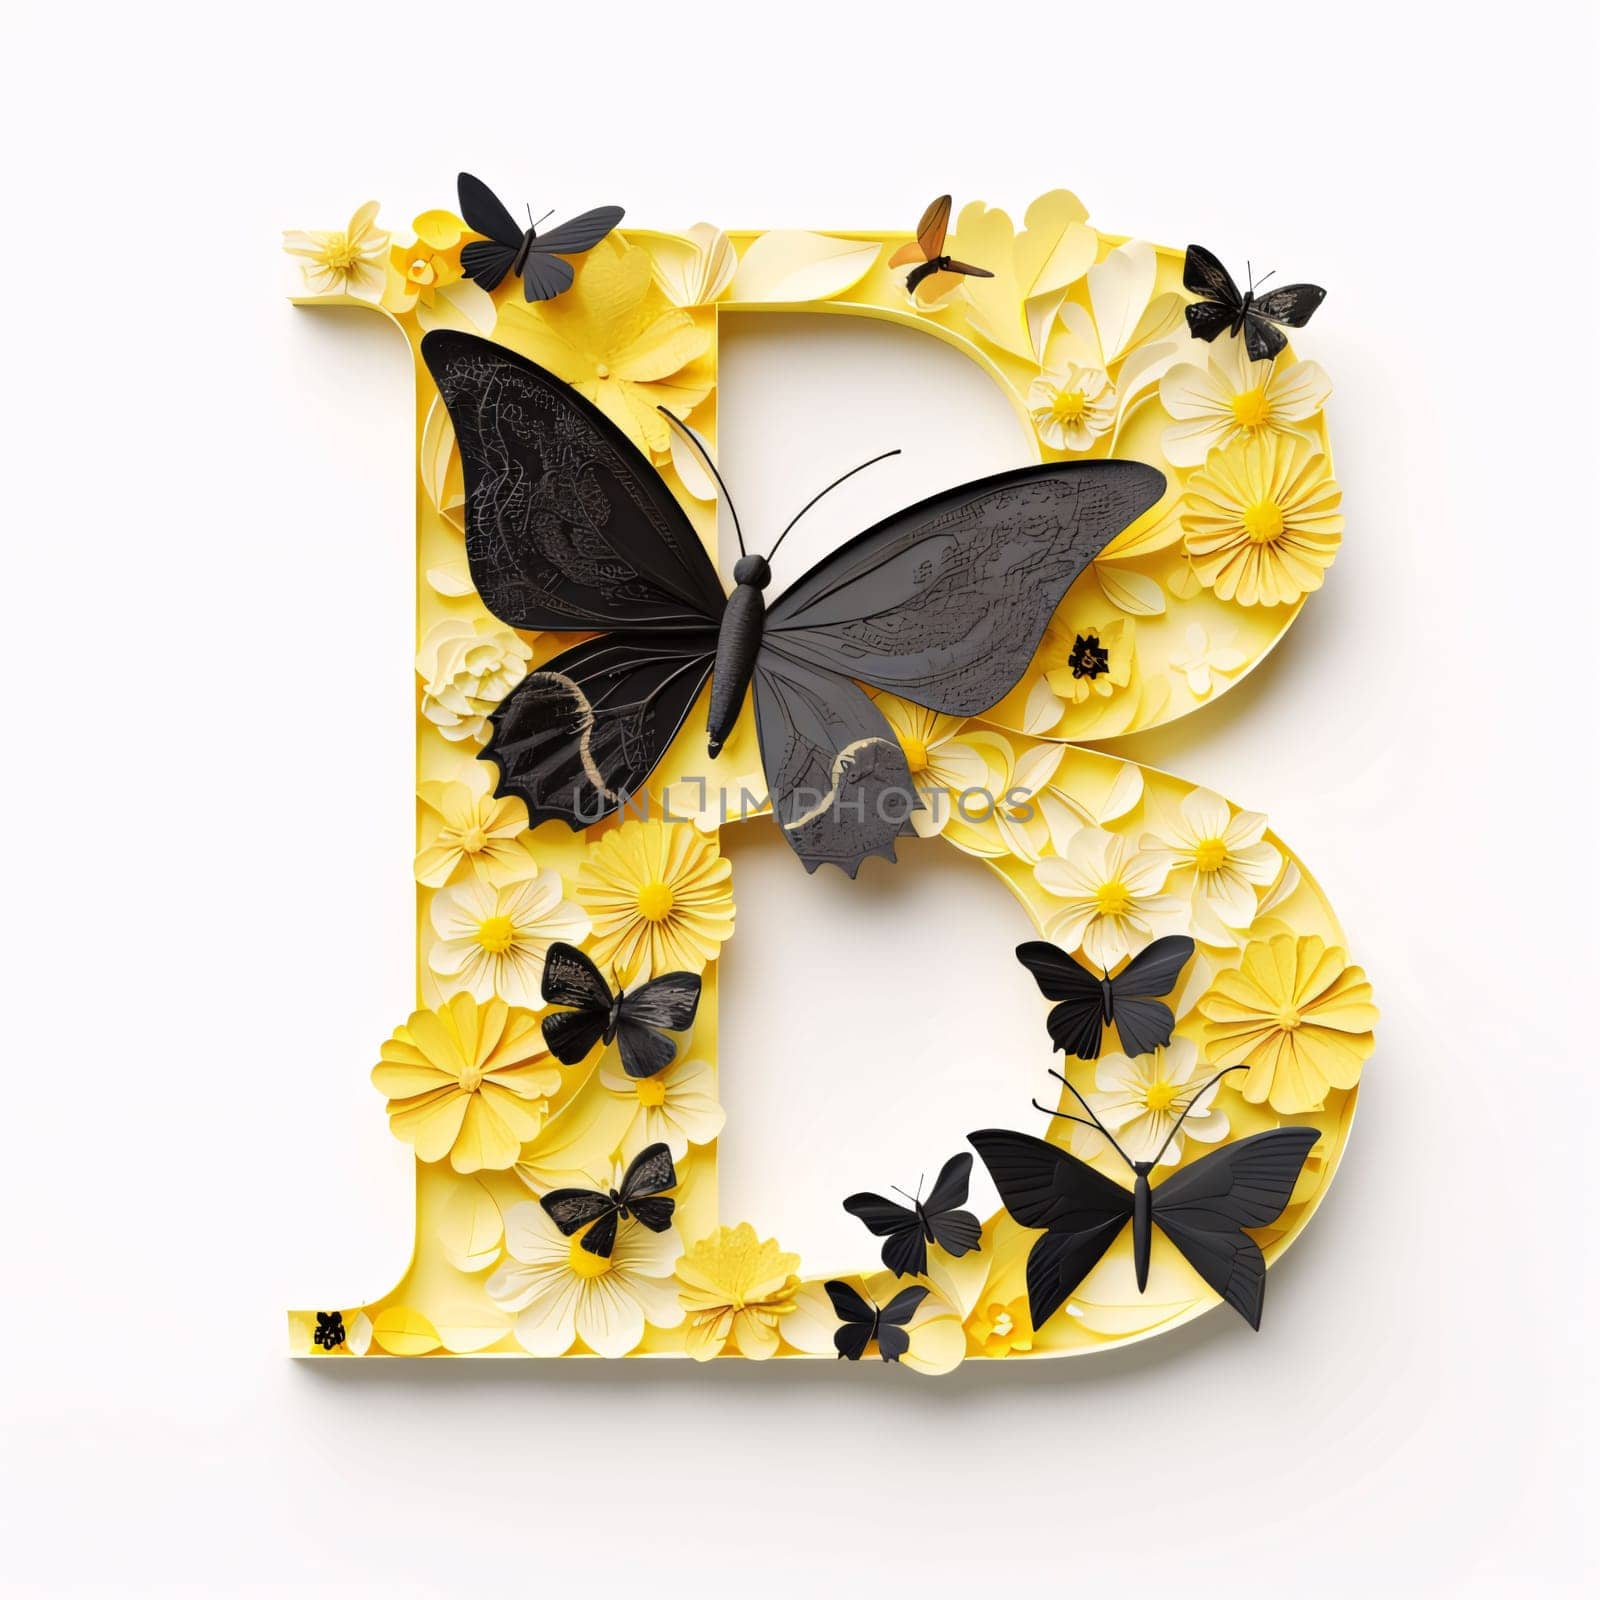 Graphic alphabet letters: Butterfly alphabet, letter B made of paper flowers on white background